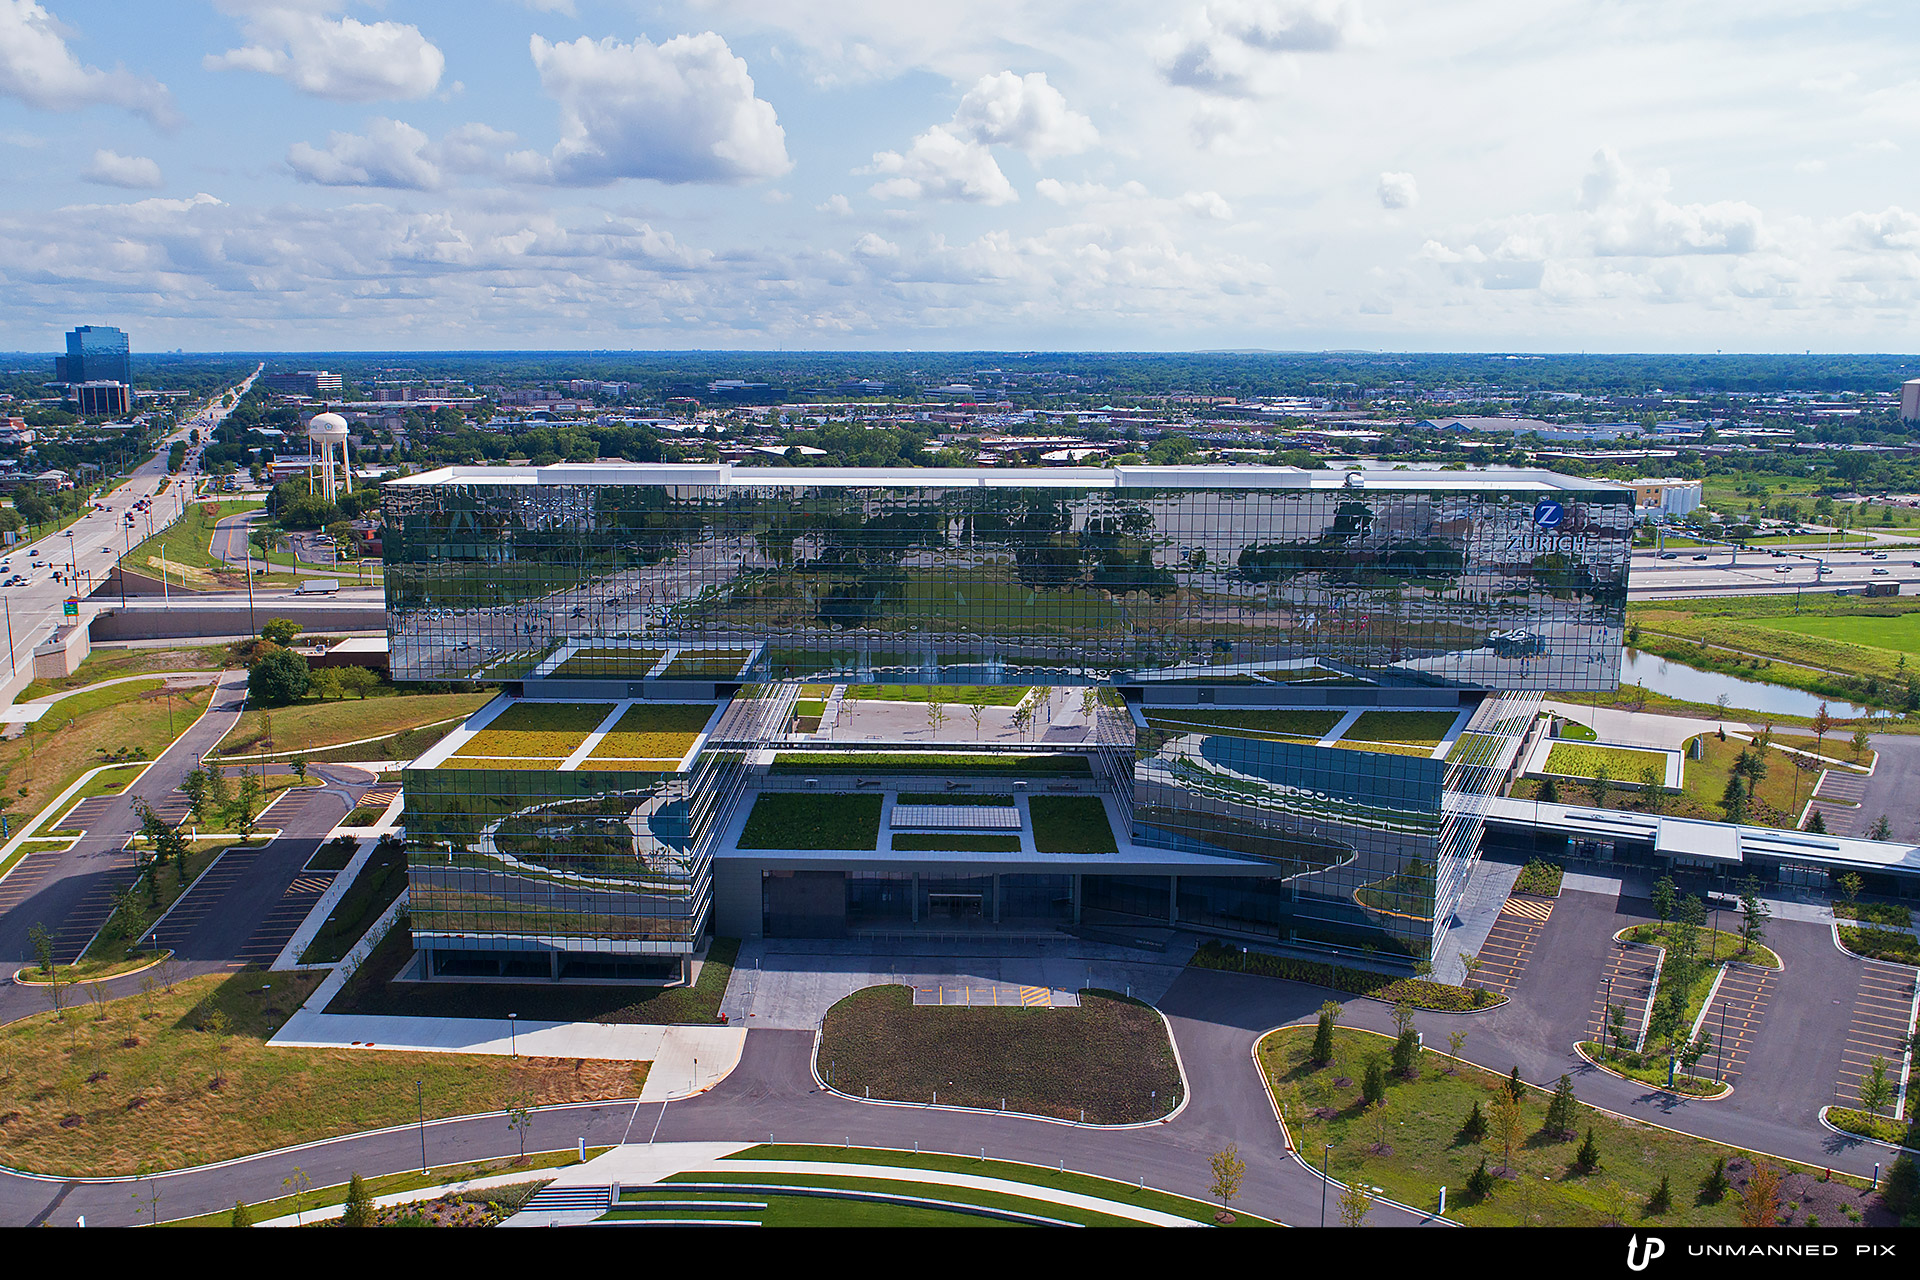 aerial view of the zurich north america headquarters, facing south west, photographed by jacob rosenfeld for unmannedpix.com